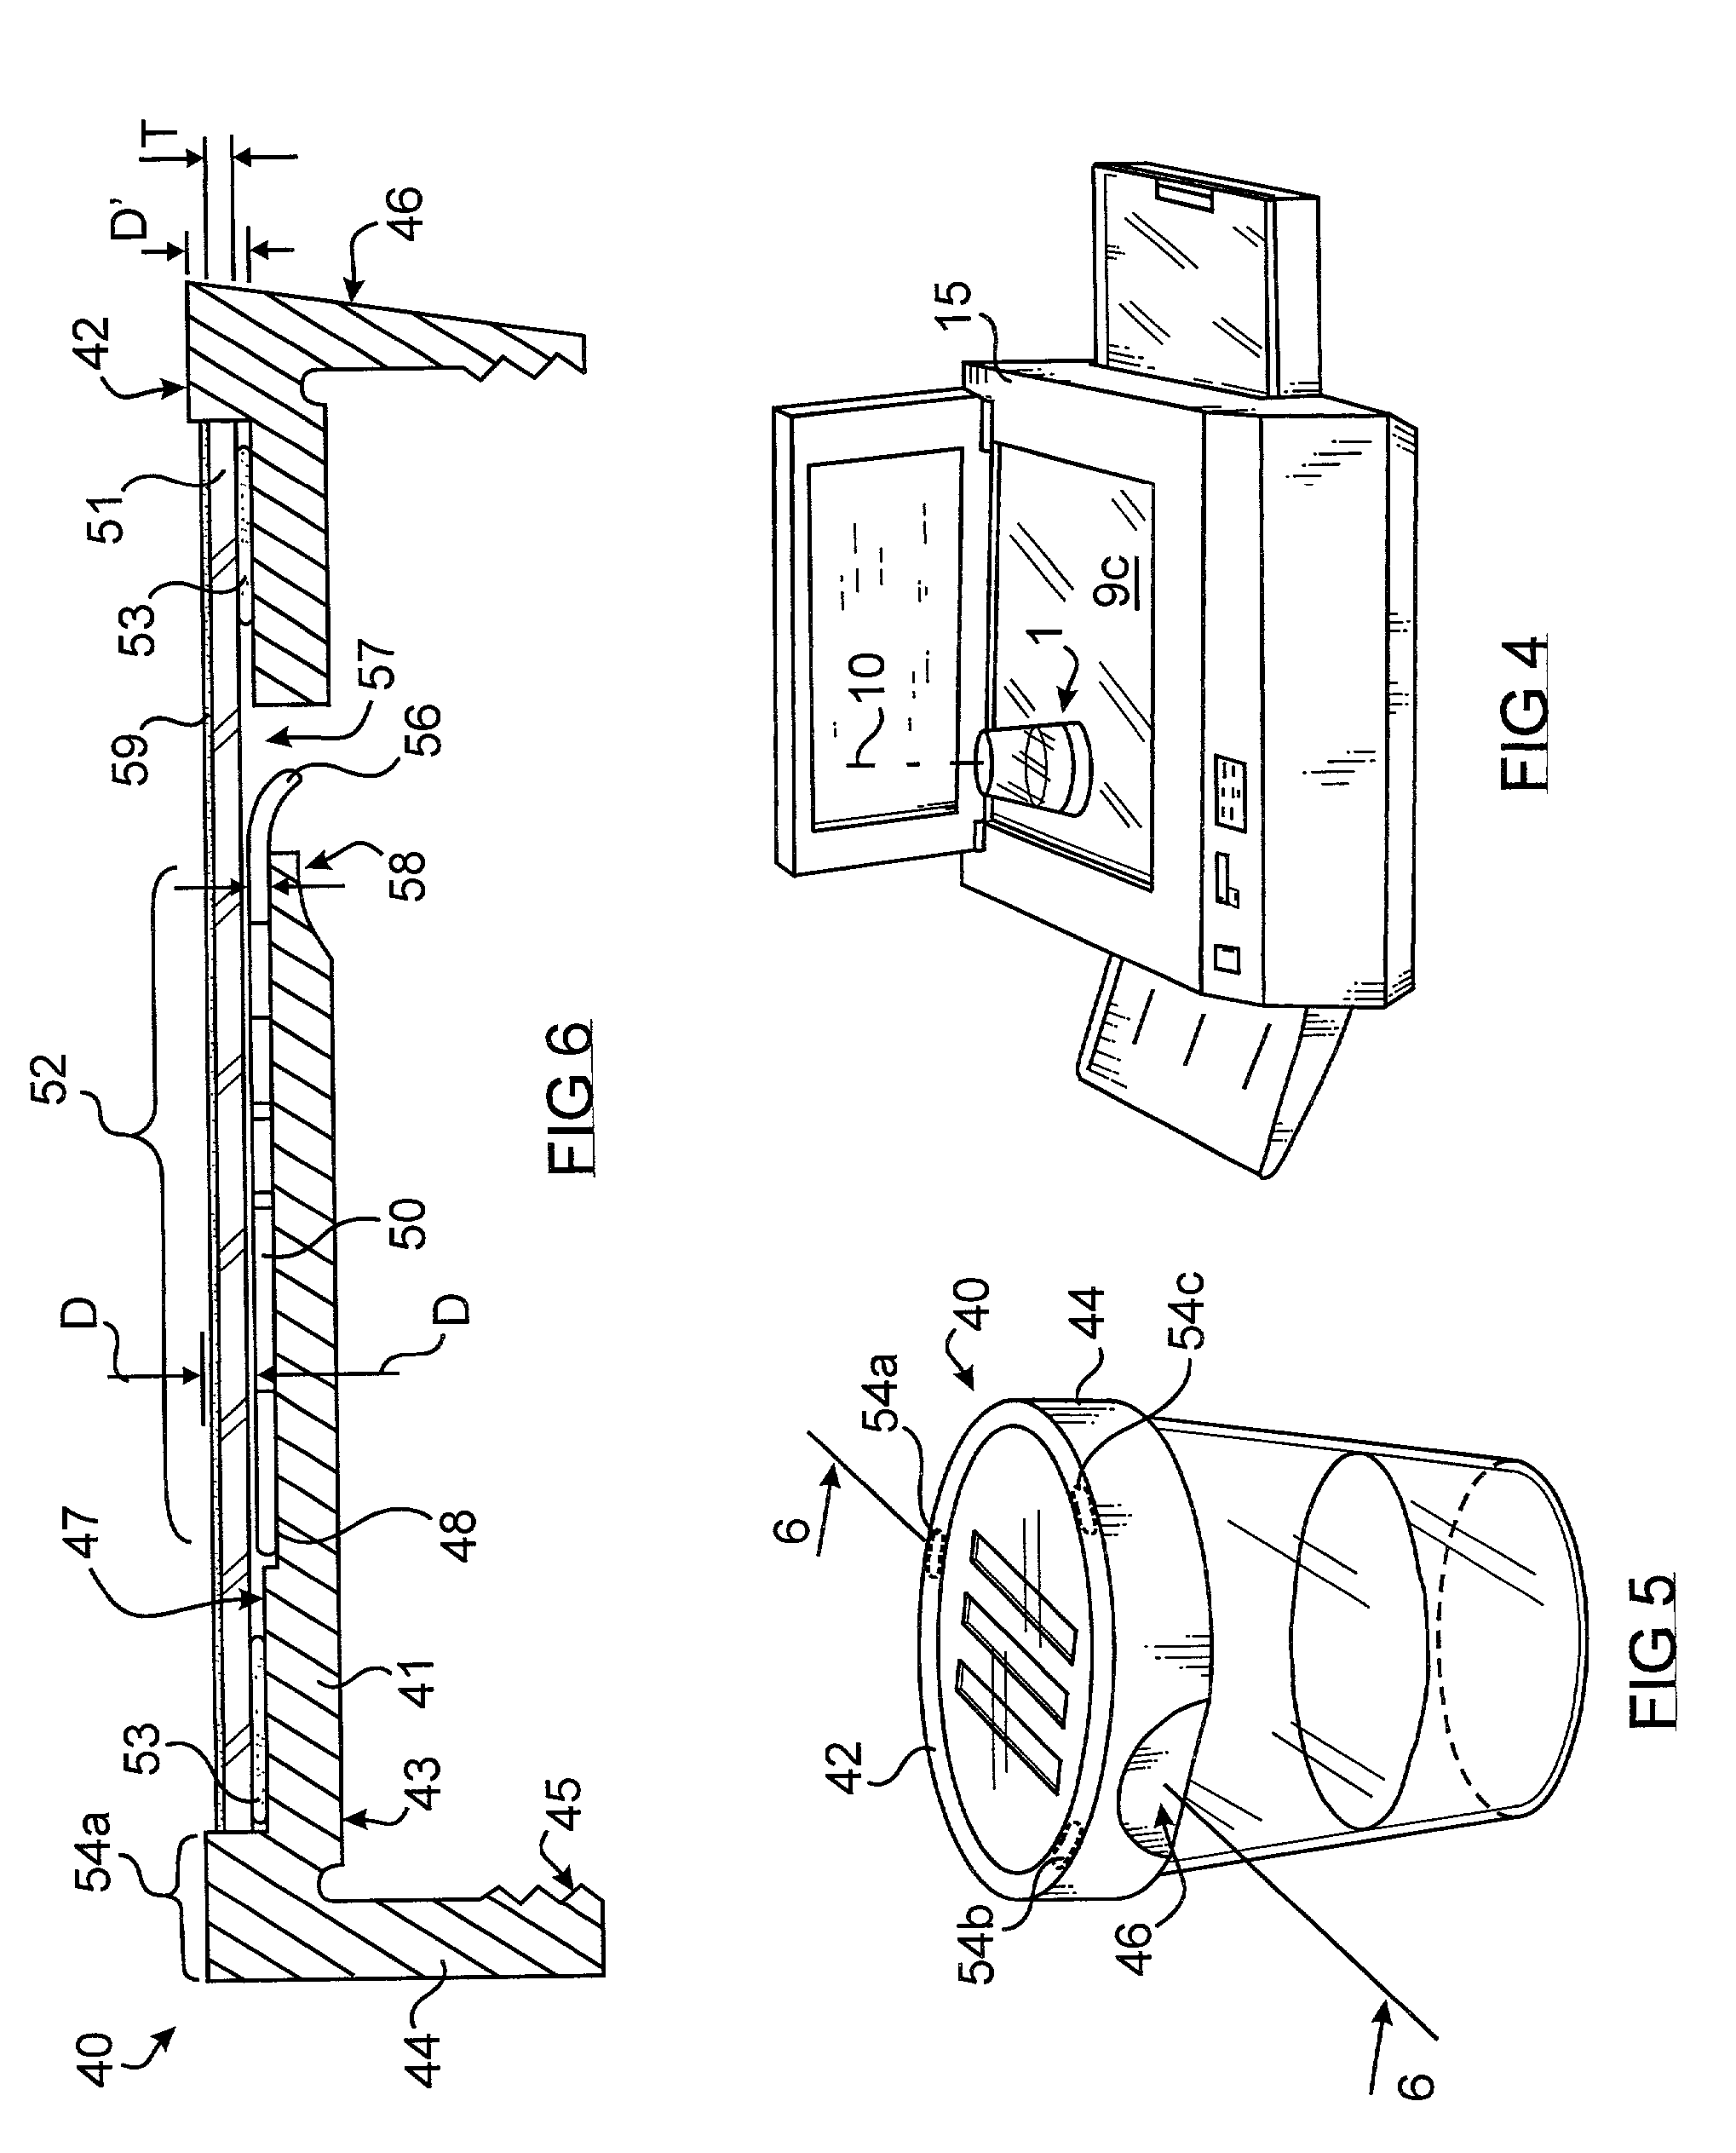 Fluid-specimen collecting and testing device and method for recording chromatographic assay test results